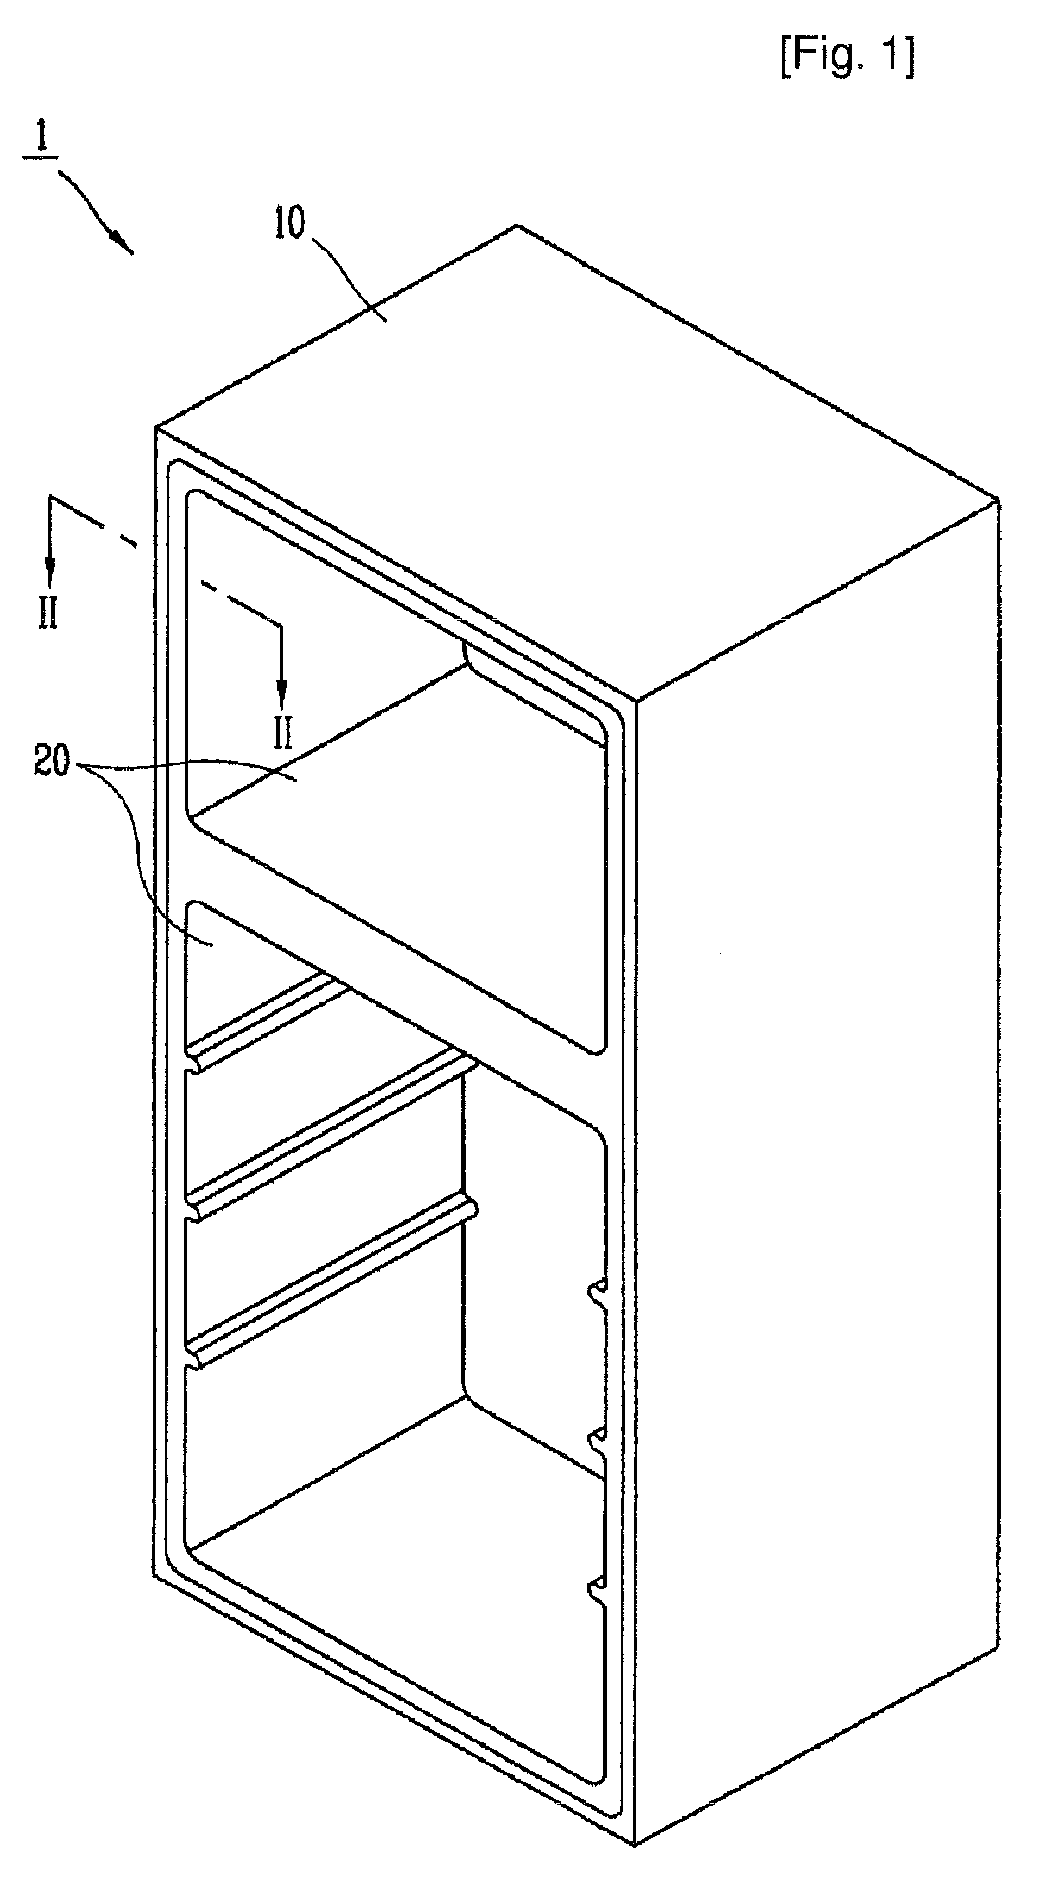 Vaccum Insulation Panal And Insulation Structure Of Refrigerator Using The Same